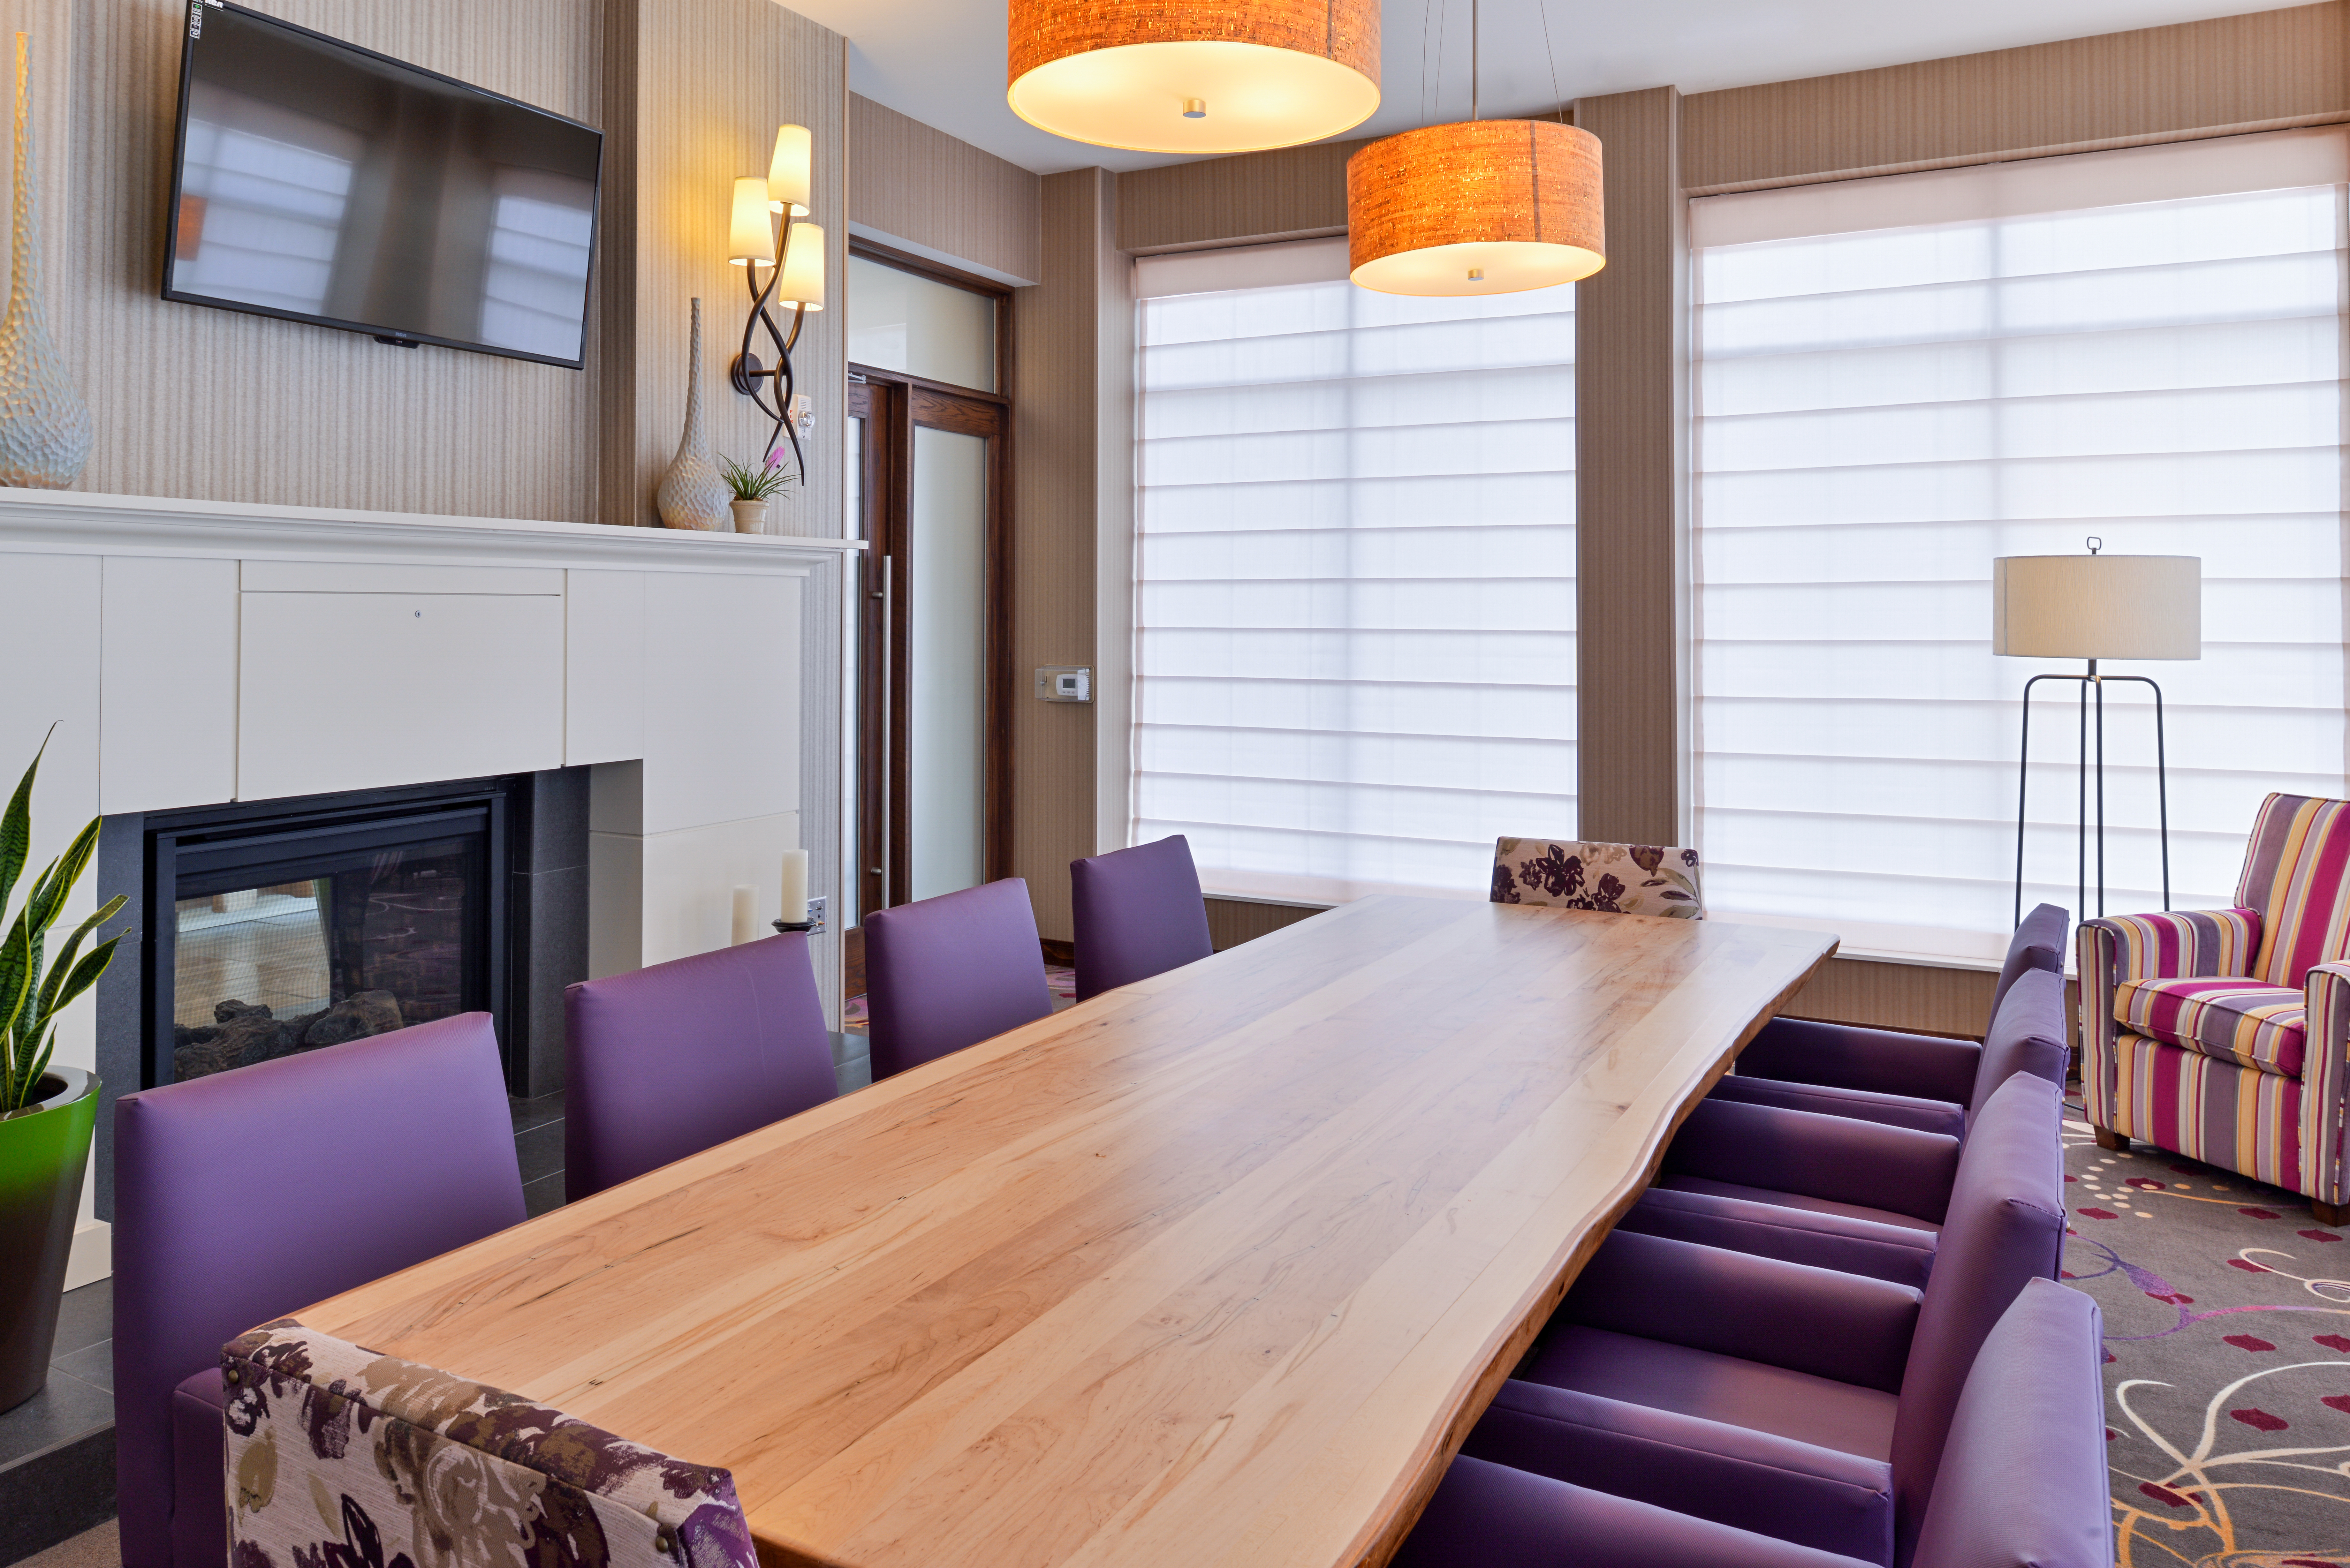 Conference Room with TV Above Fireplace, Large Windows, Long Table, Ten Purple Chairs and Armchair in Corner  by Window